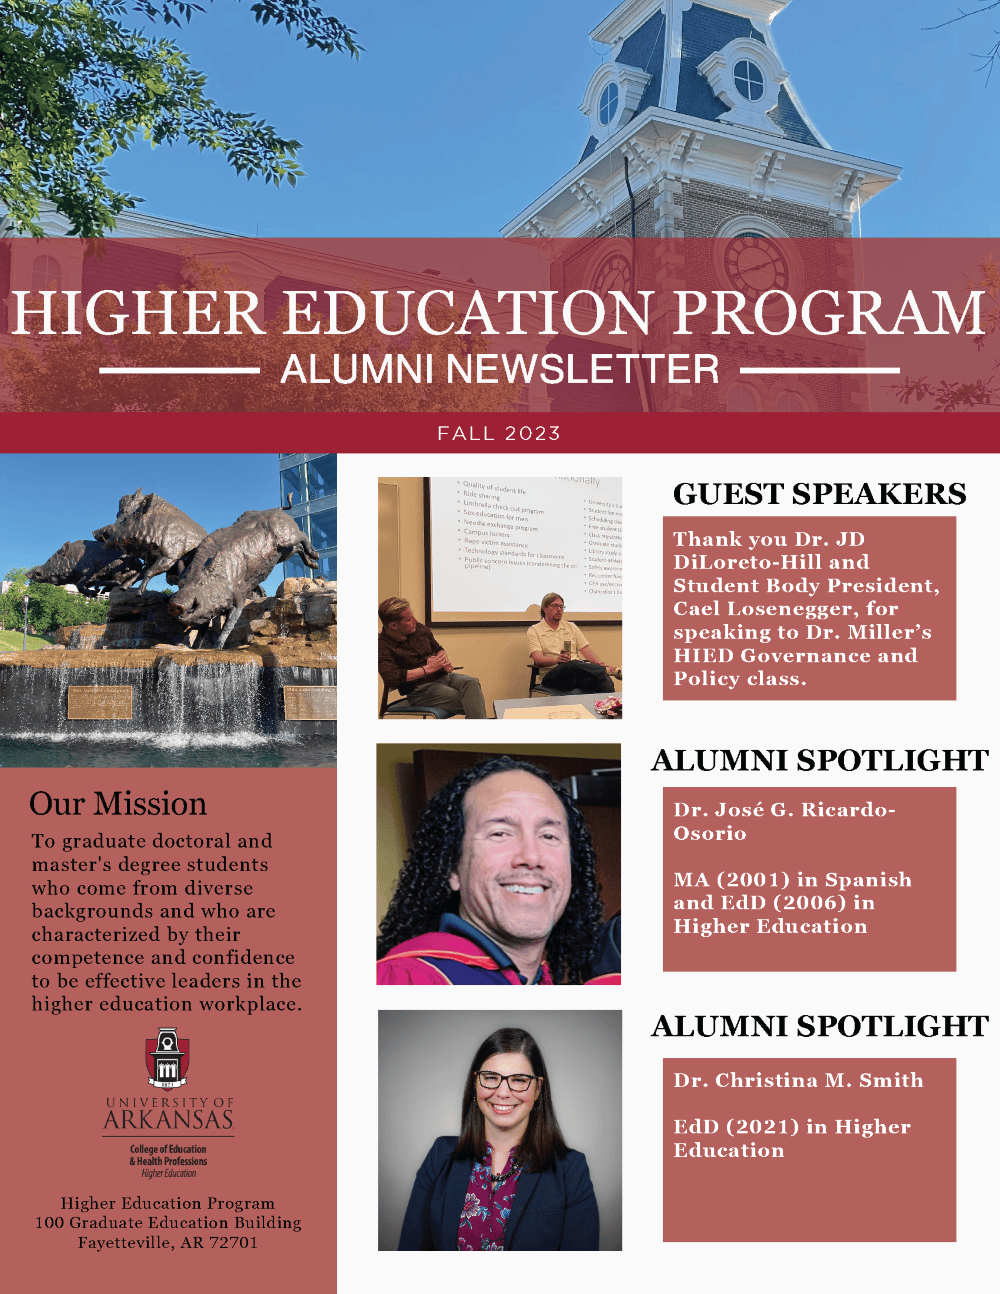 Cover page of the Fall 2023 HIED alumni newsletter